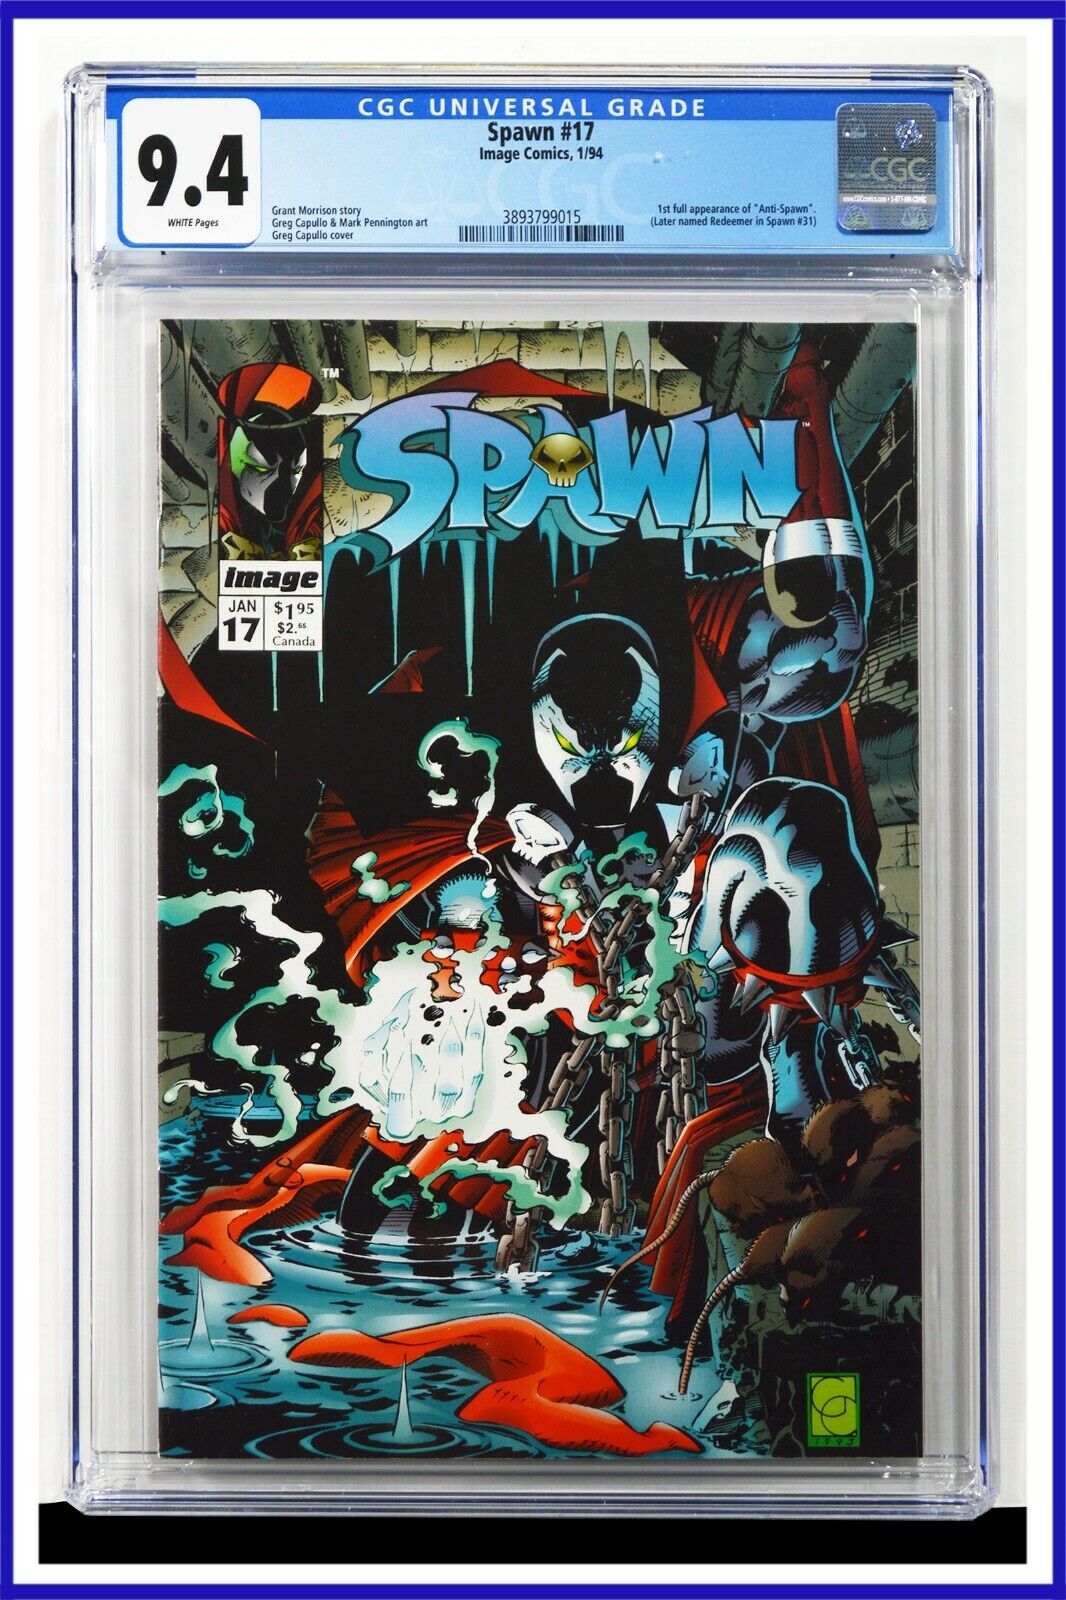 Spawn #17 CGC Graded 9.4 Image January 1994 White Pages Comic Book.